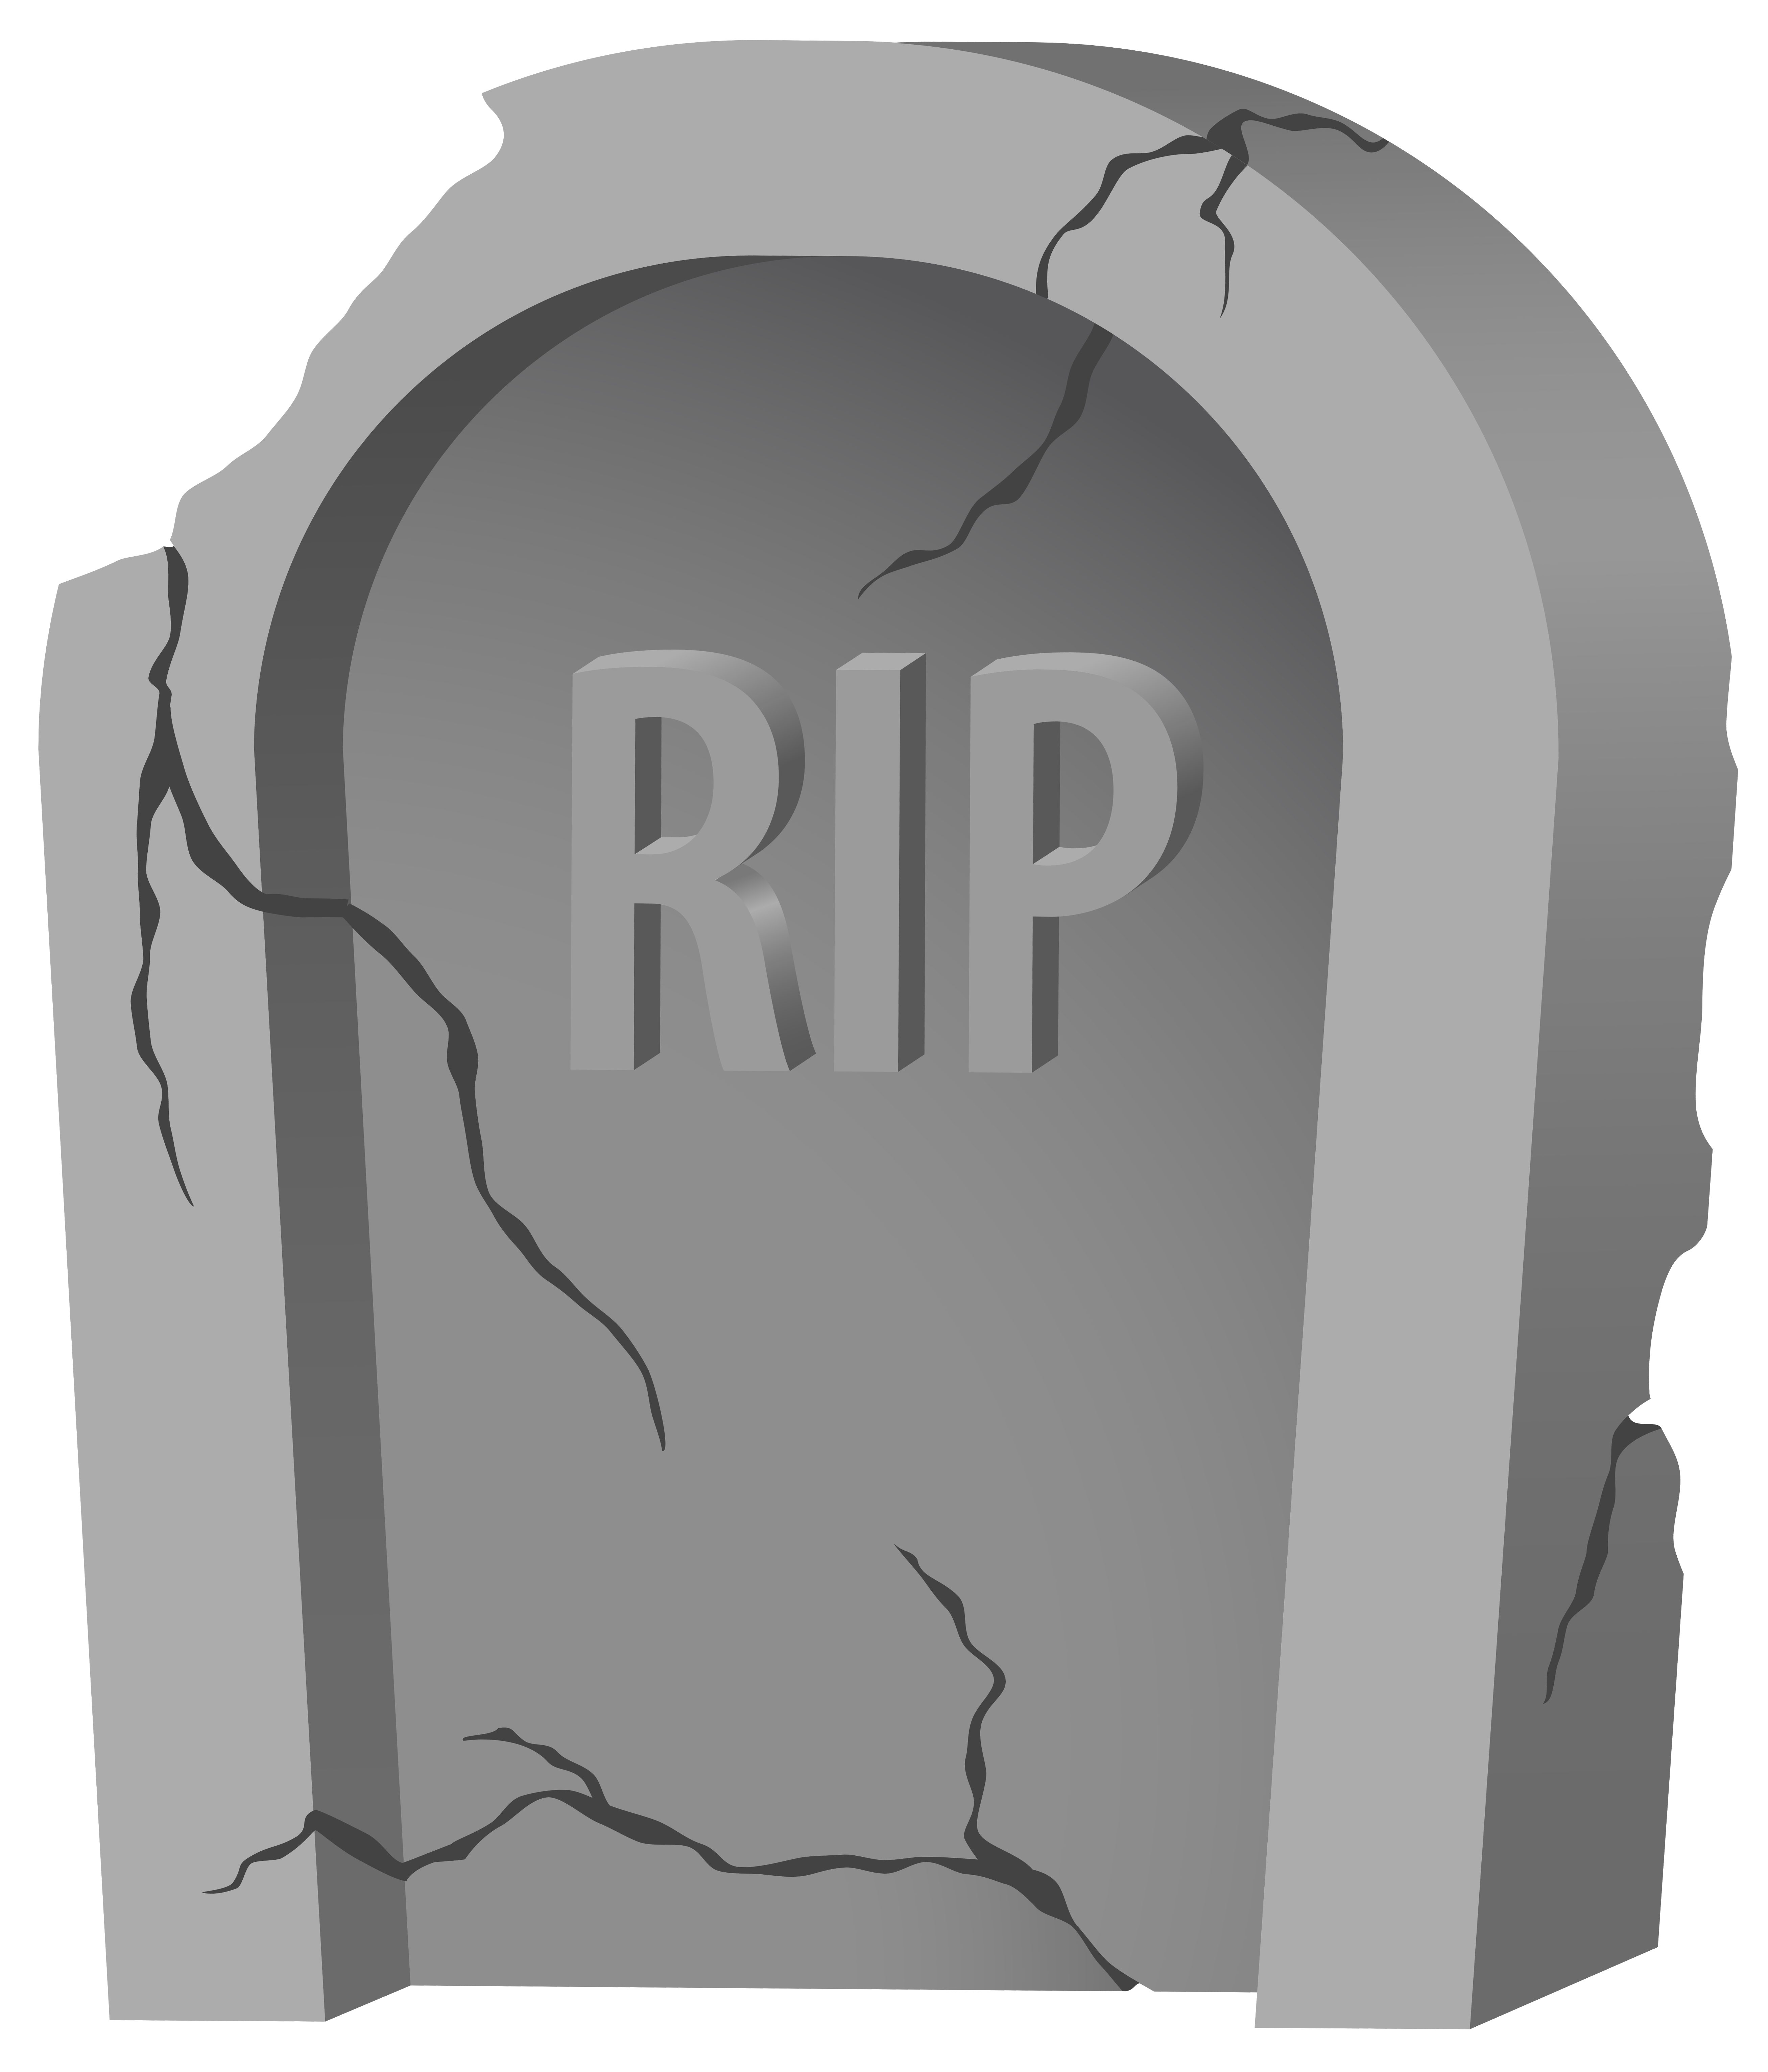 RIP PNG Transparent Images - PNG All